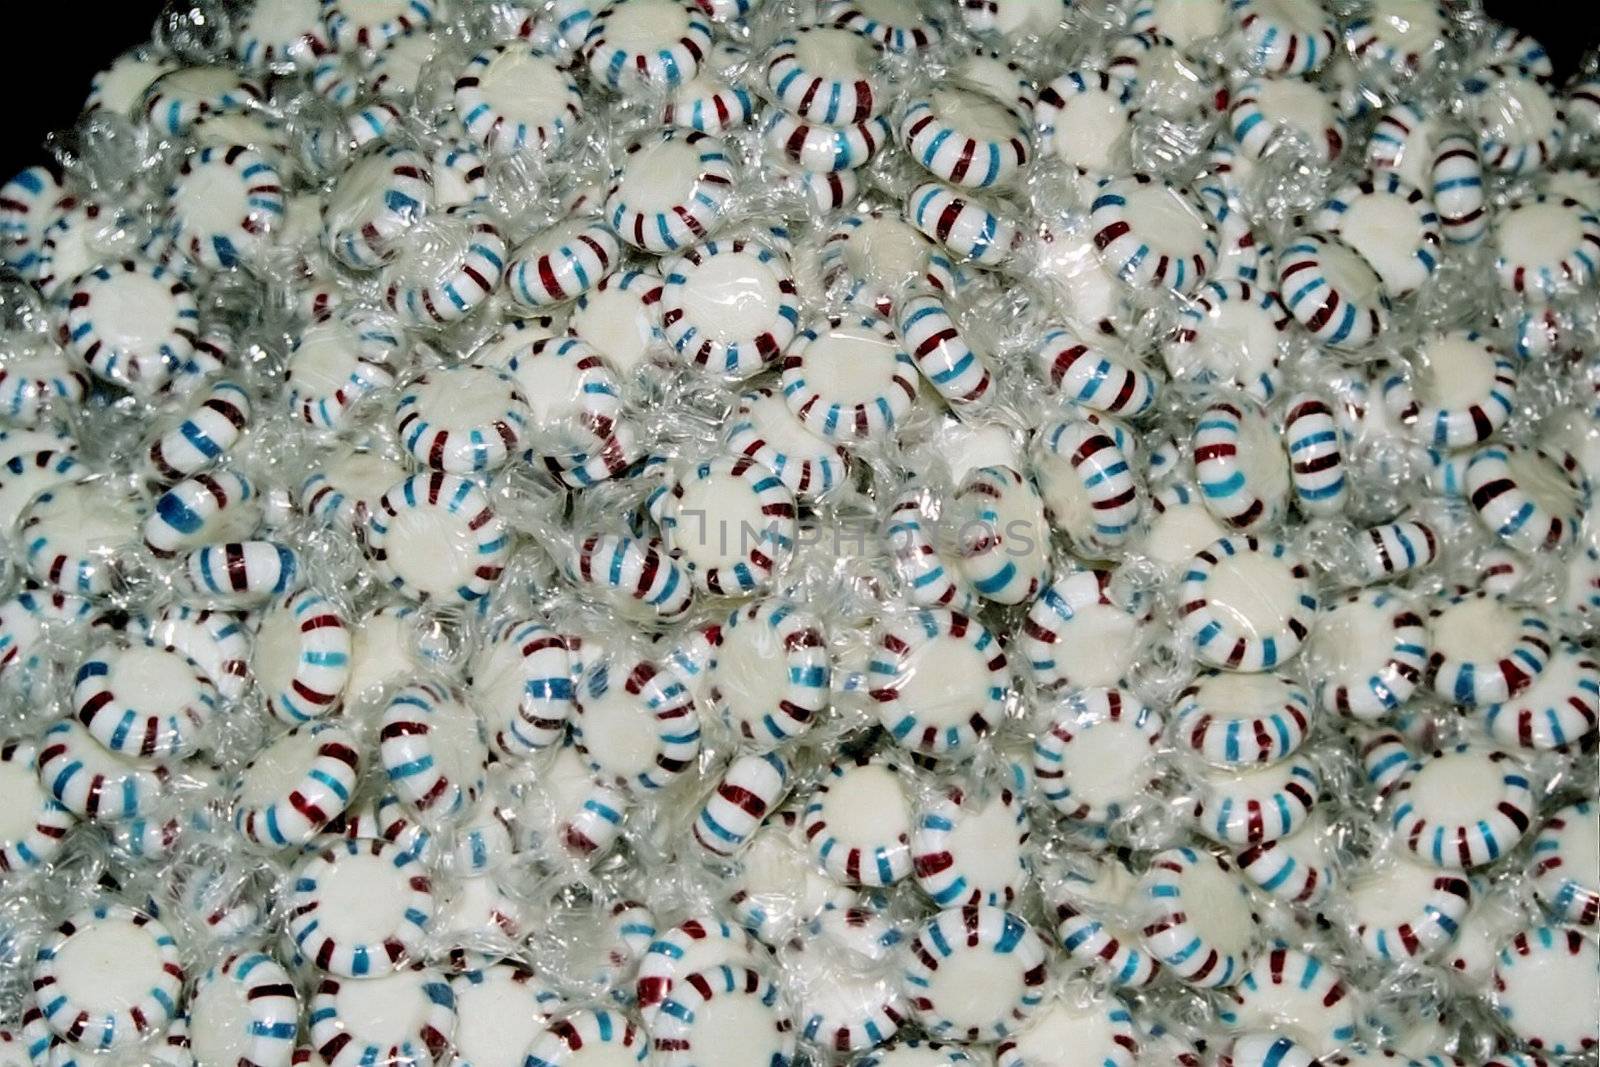 A large pile of peppermint candies